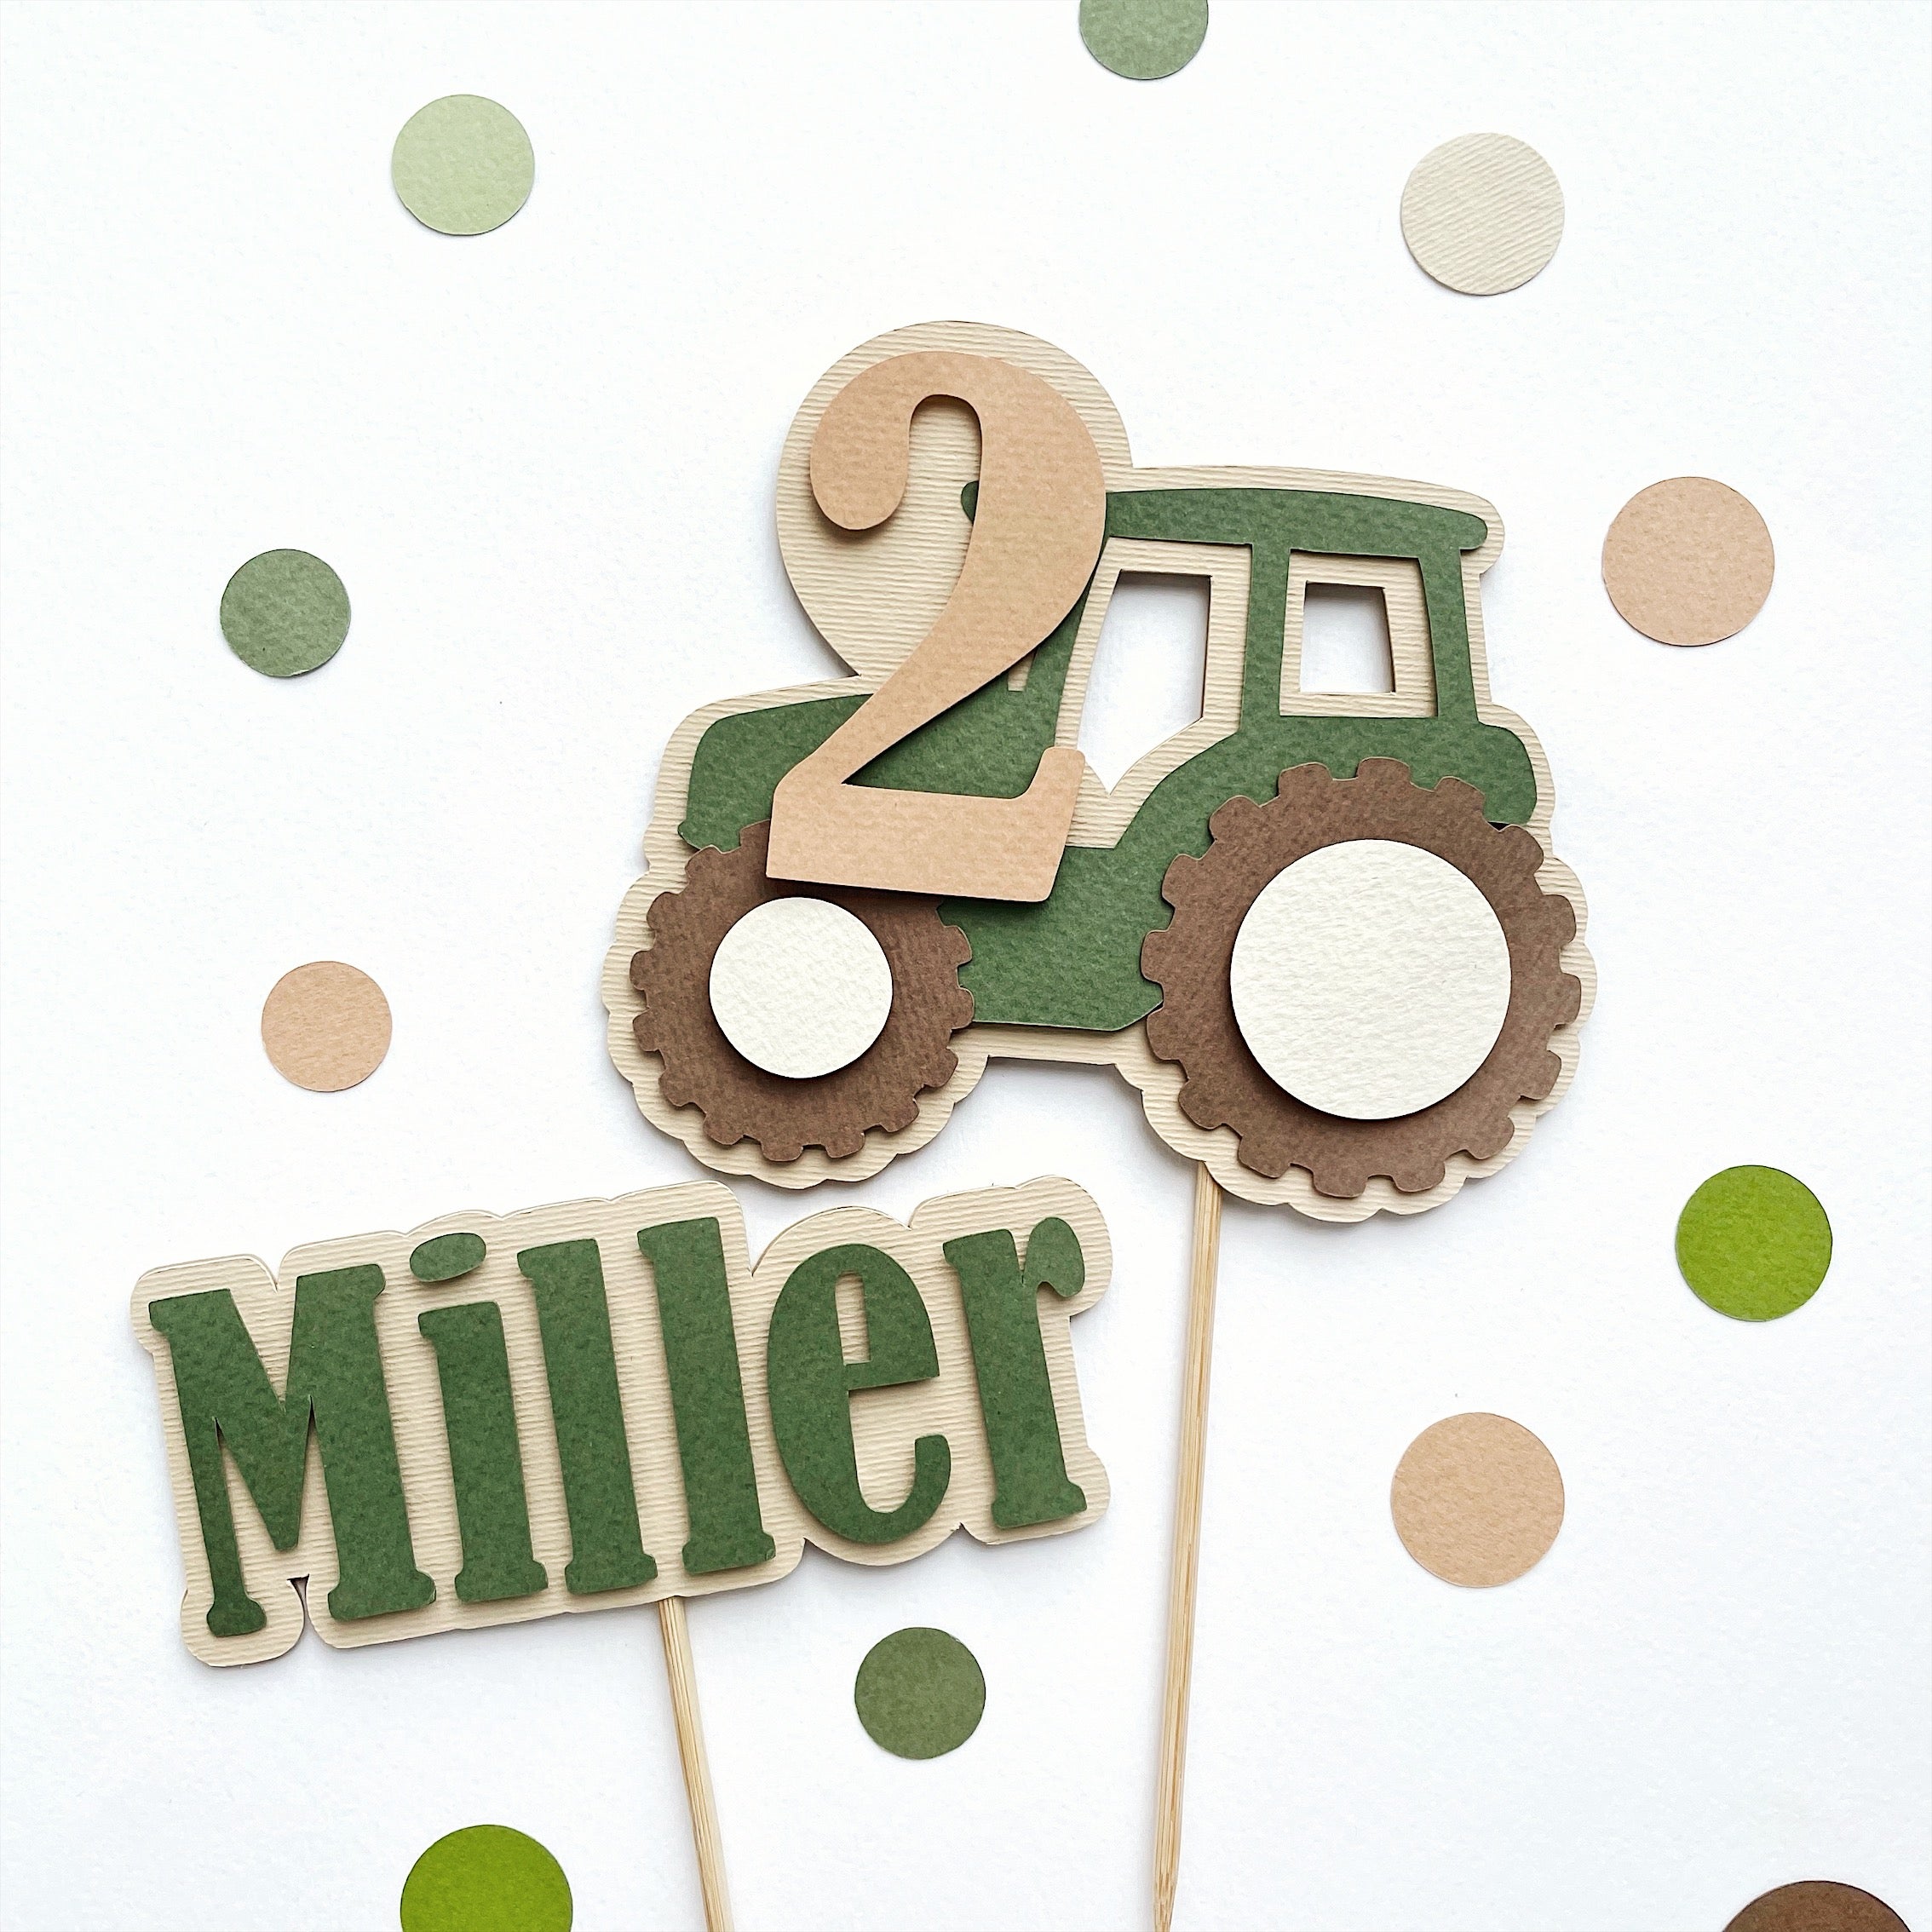 Tractor Toddler Birthday Cake Topper Tractor2+ Birthday Decor Tractor Party Ides Farm theme Birthday party